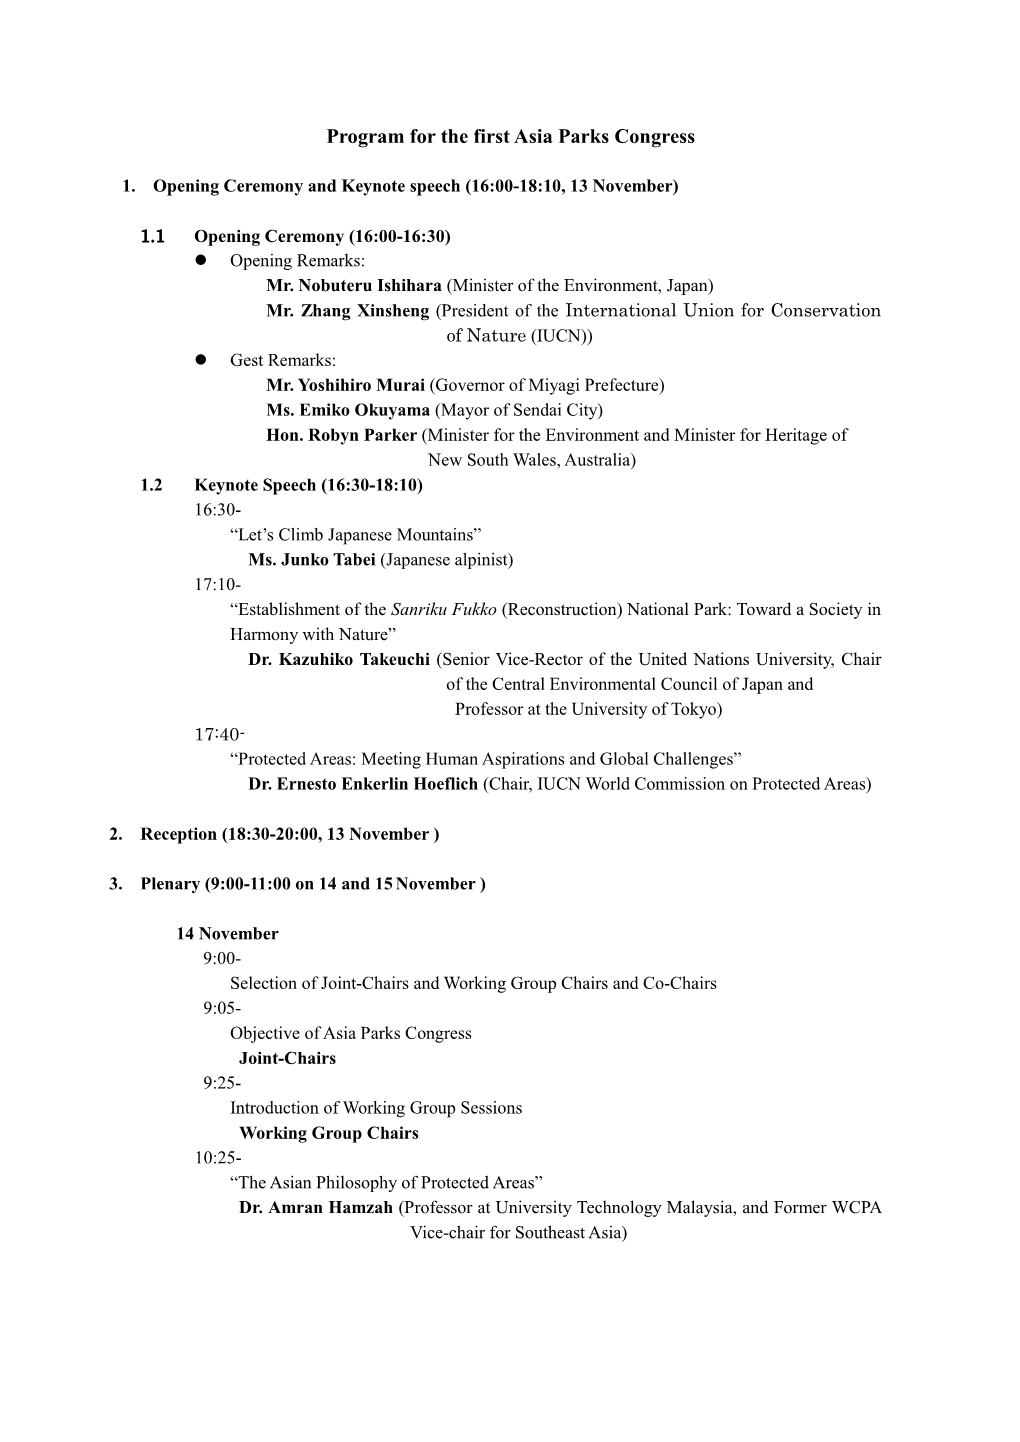 Program for the First Asia Parks Congress